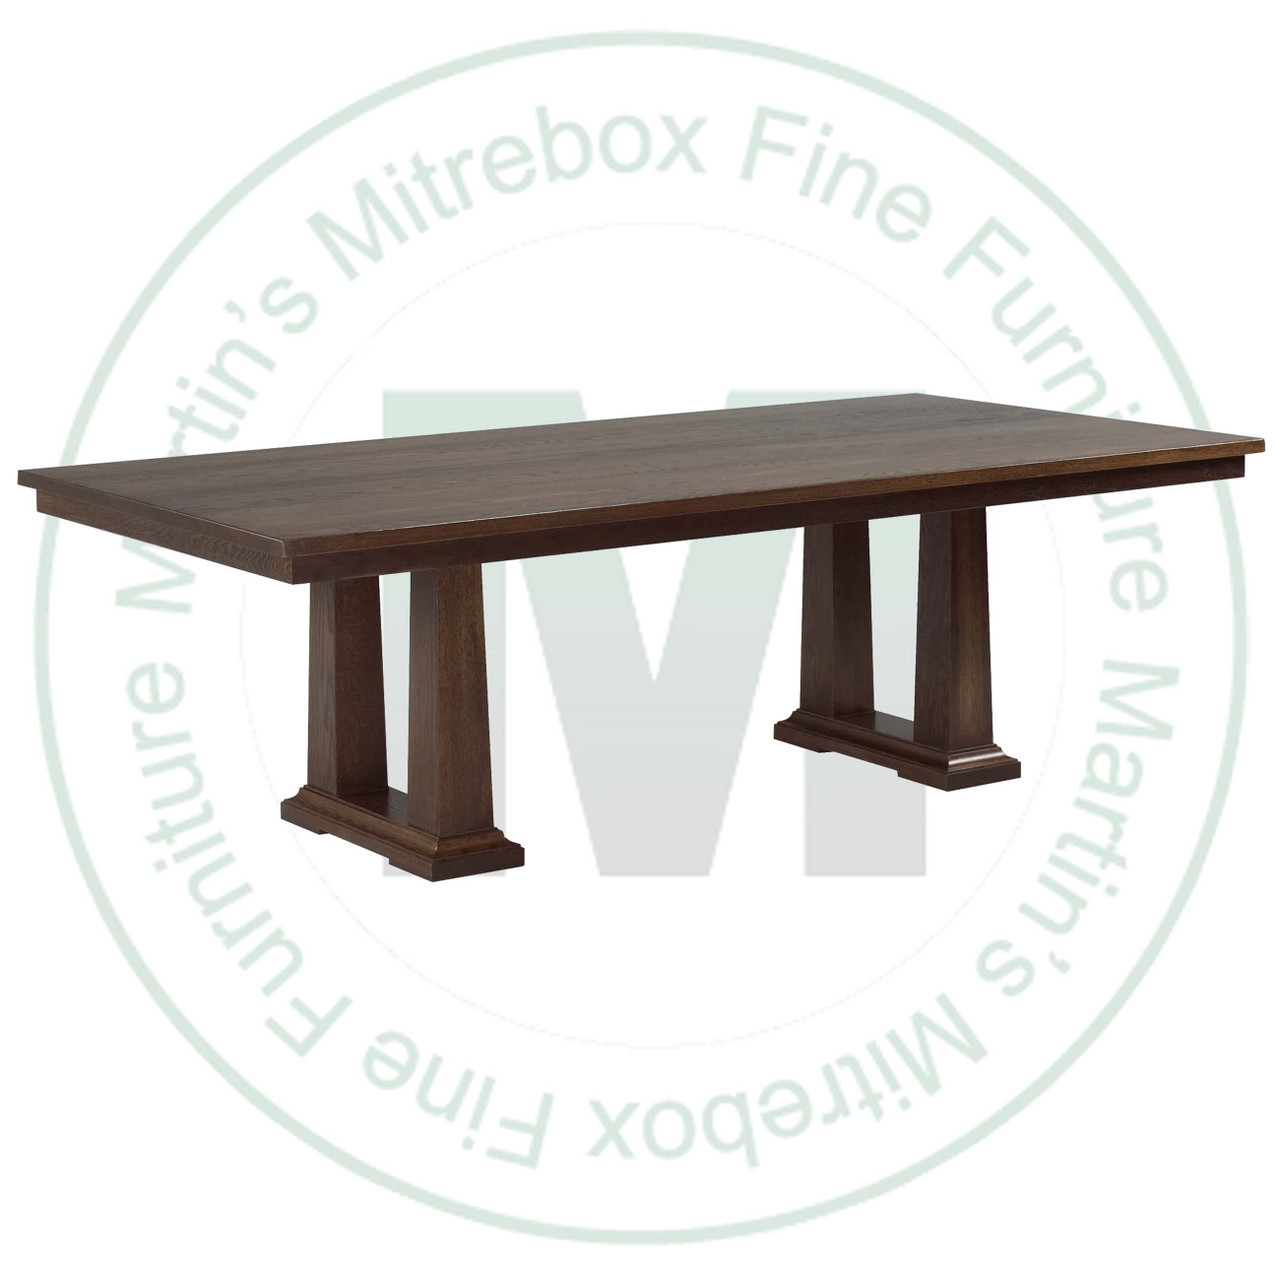 Maple Acropolis Extension Double Pedestal Table 42''D x 84''W x 30''H With 3 - 12'' Leaves Table Has 1.25'' Thick Top